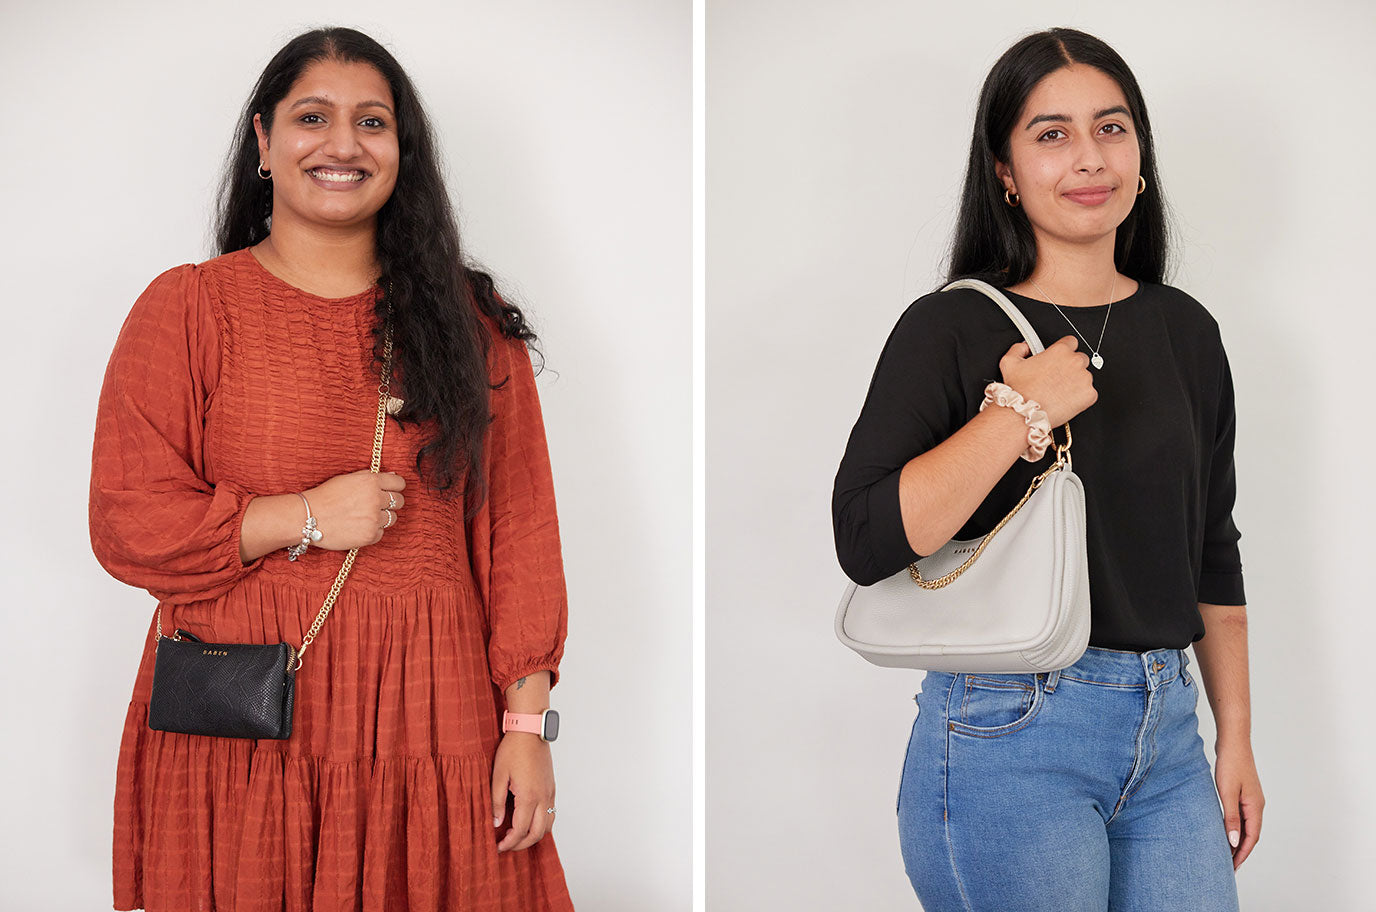 WOMEN IN BUSINESS | MEET SIMRAN AND SONYA FROM GIRLS THAT INVEST